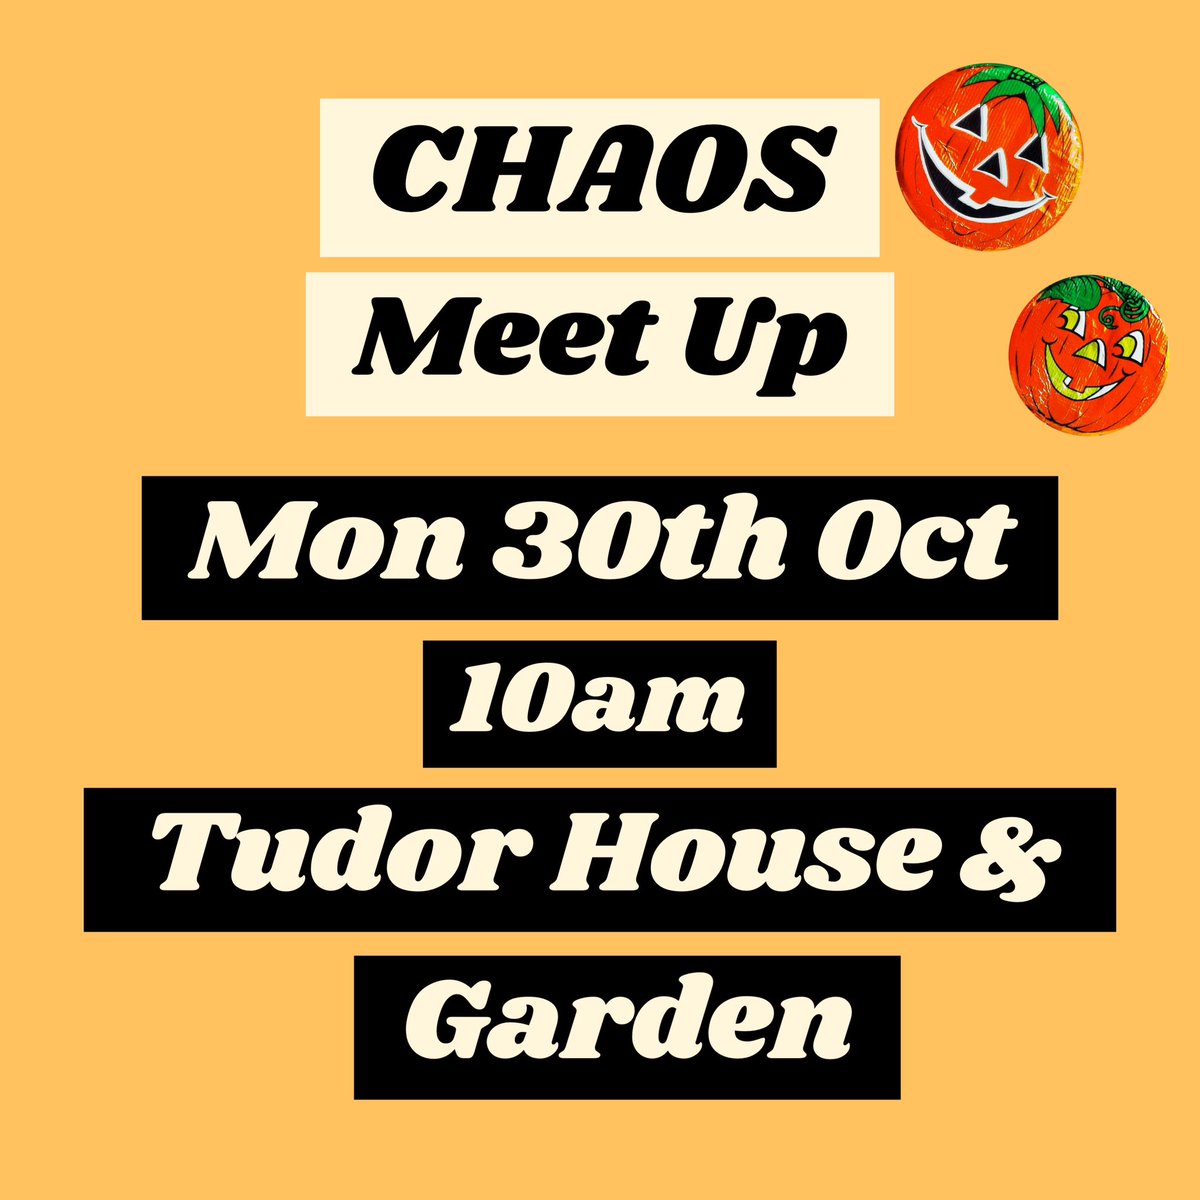 Looking forward to our October meet up tomorrow! This month we’re in the spooky surroundings of Tudor House and Garden 👻 Join us for the chance to chat with other local creatives and find out what everyone’s up to Register here 👇 eventbrite.co.uk/e/715318616237…